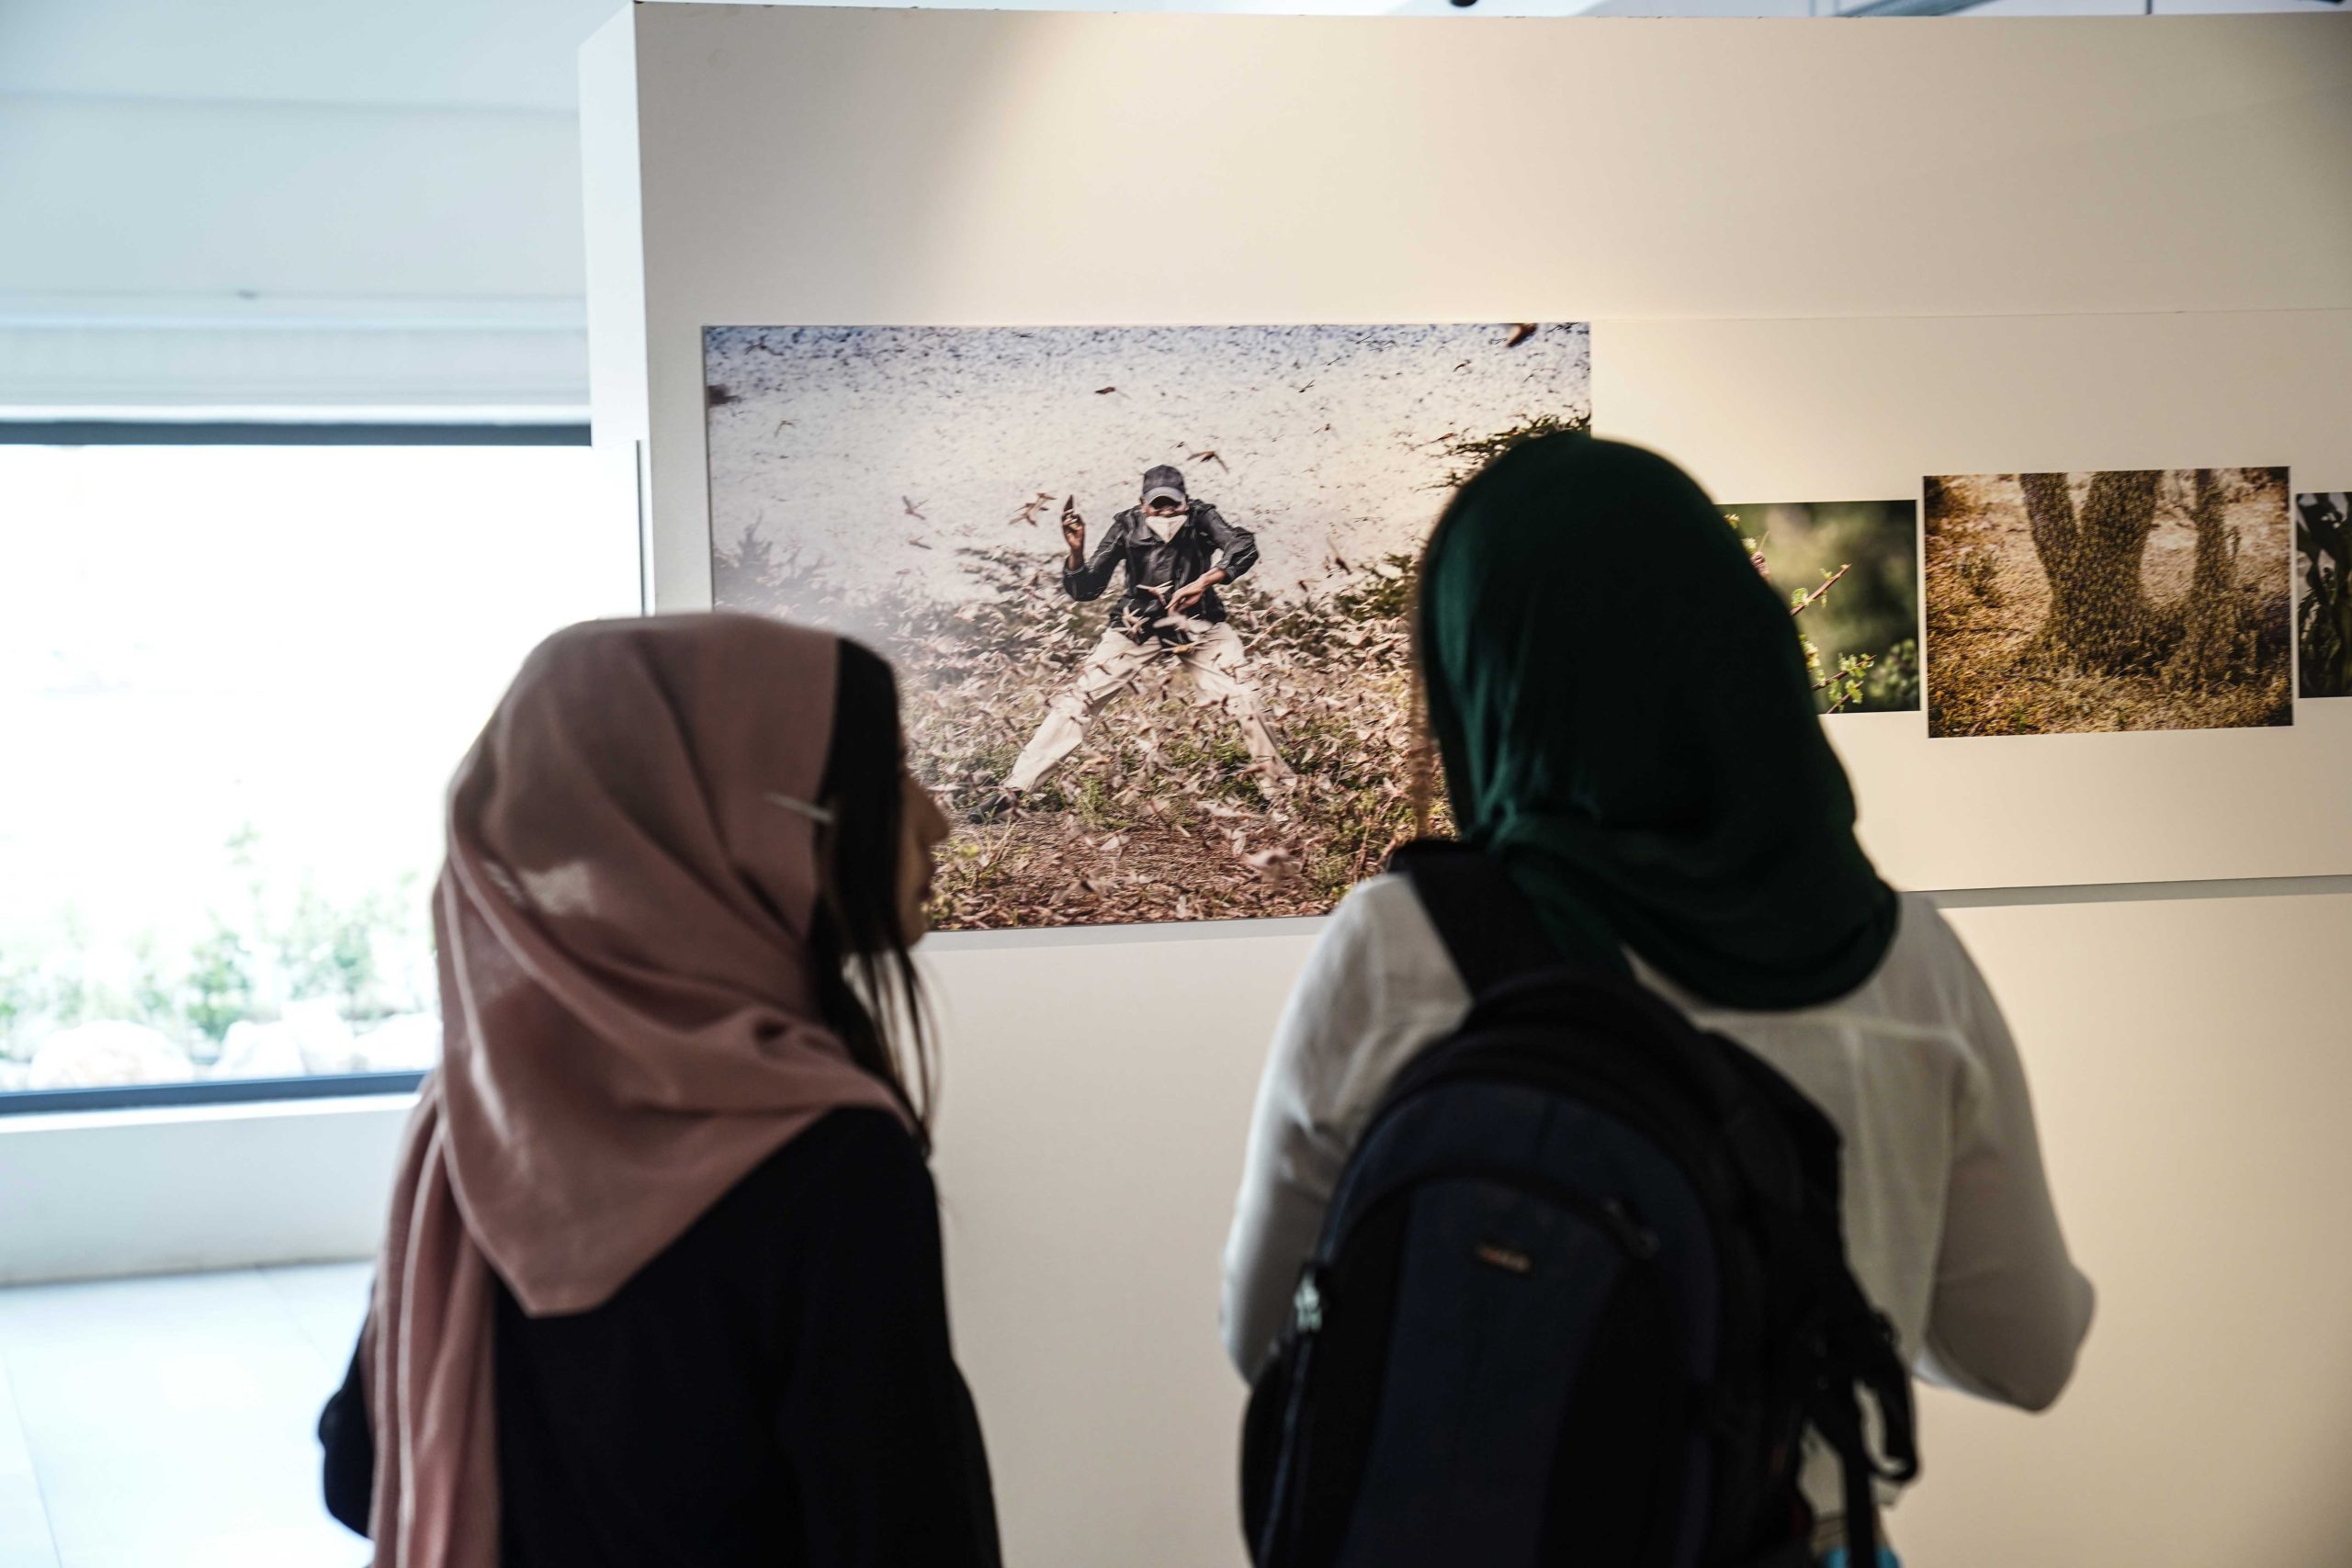 Metrography Agency hosted the World Press Photo Exhibition in Sulaymaniyah